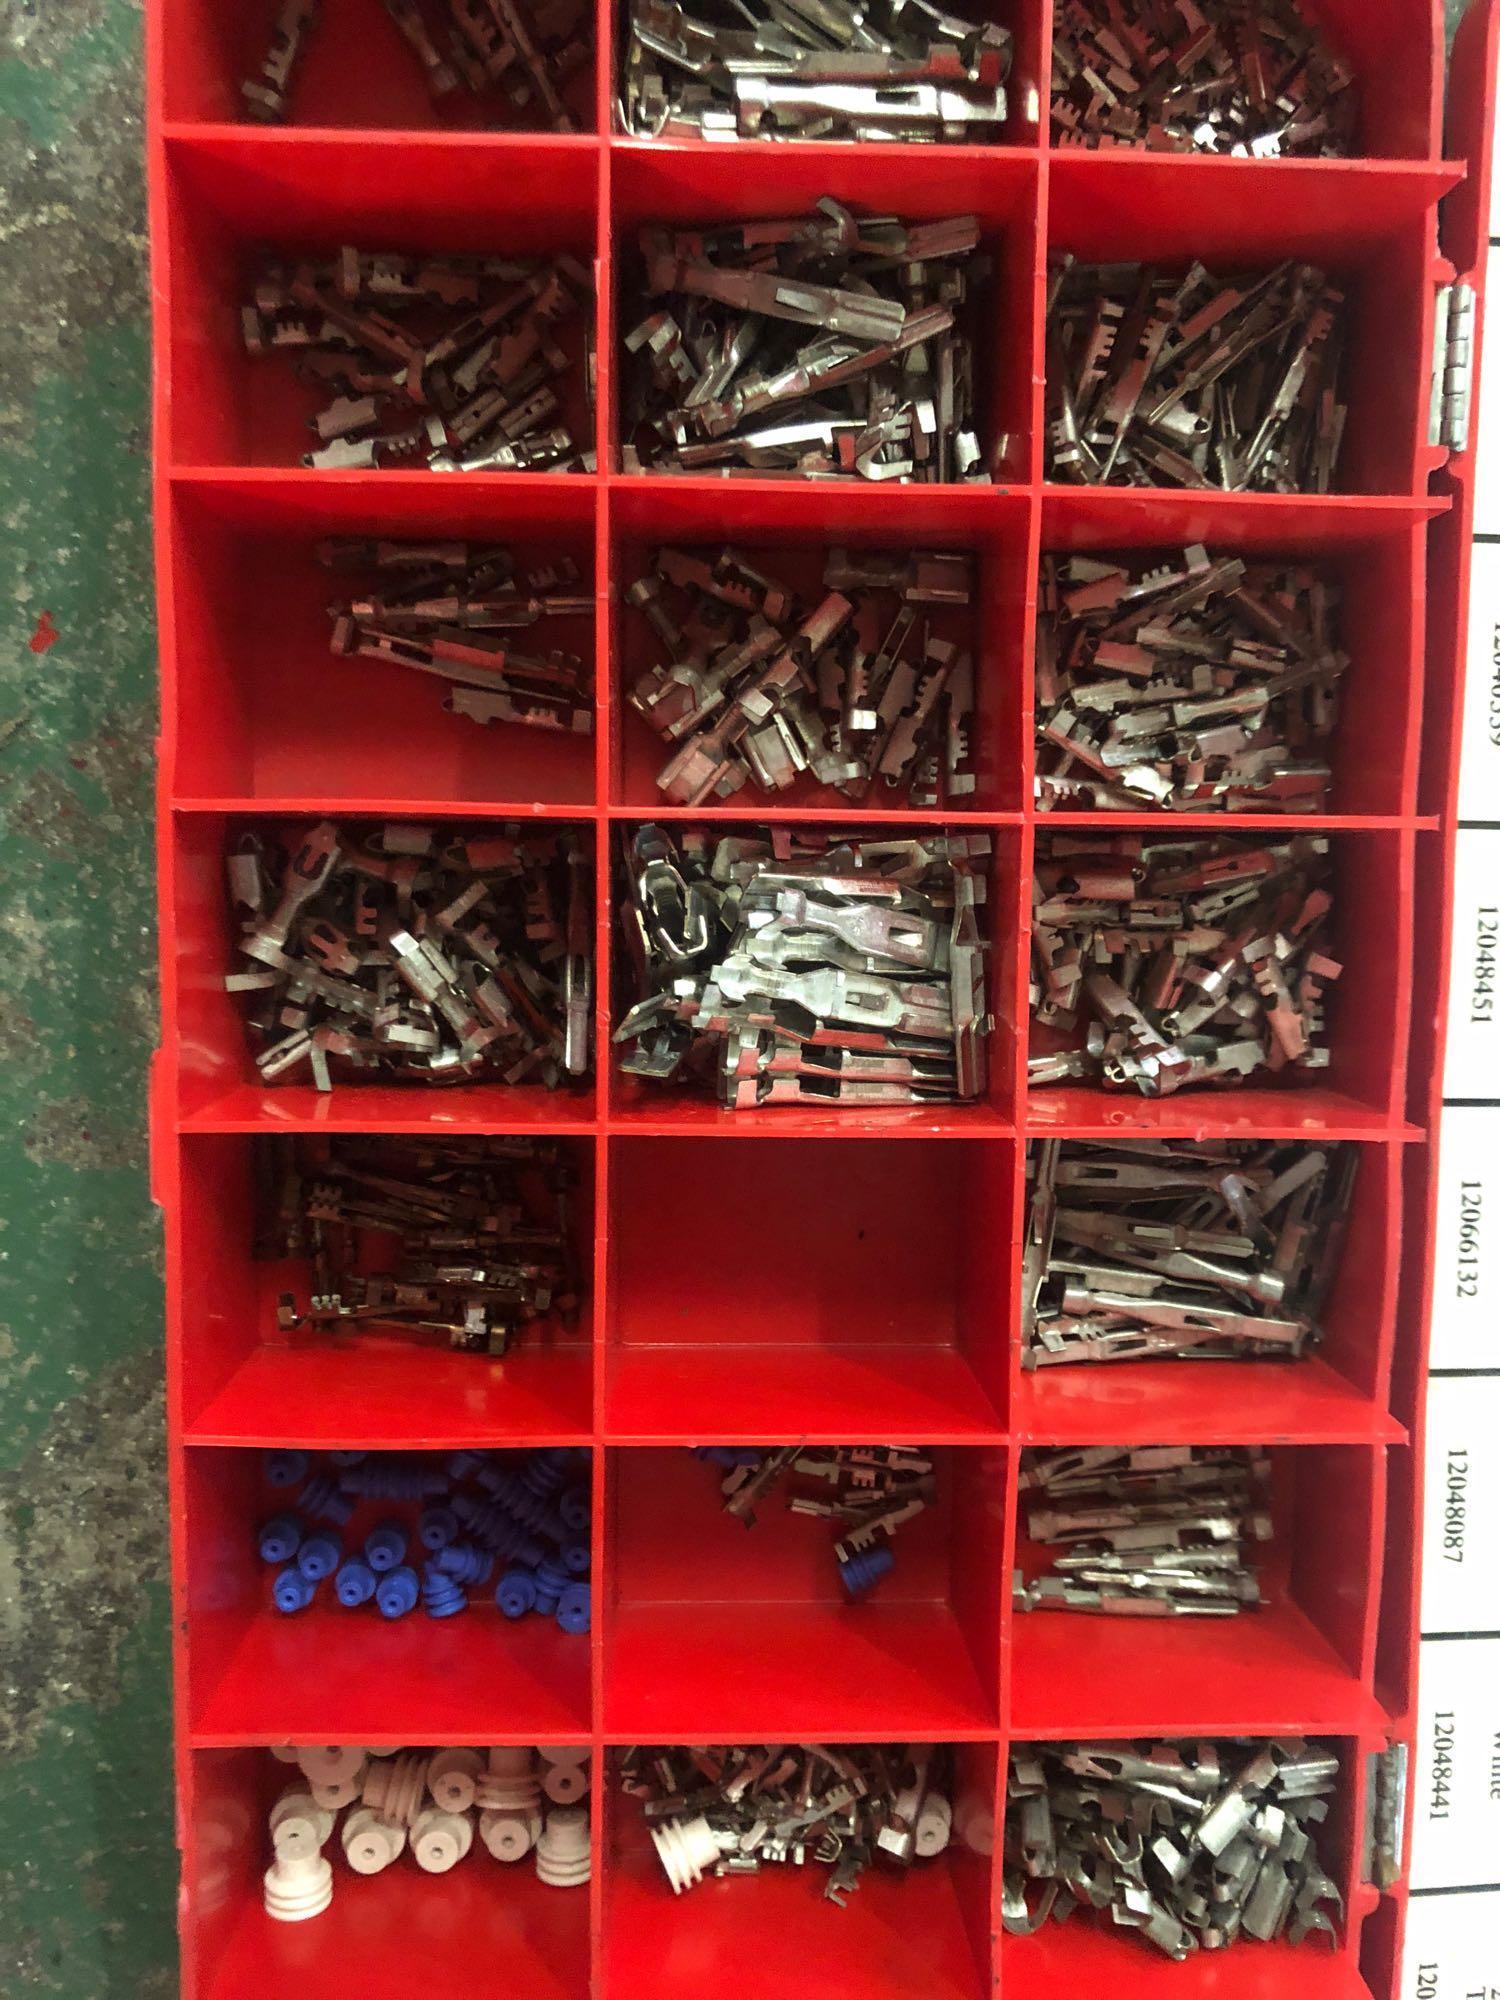 Approx 26 trays of new electrical fittings.